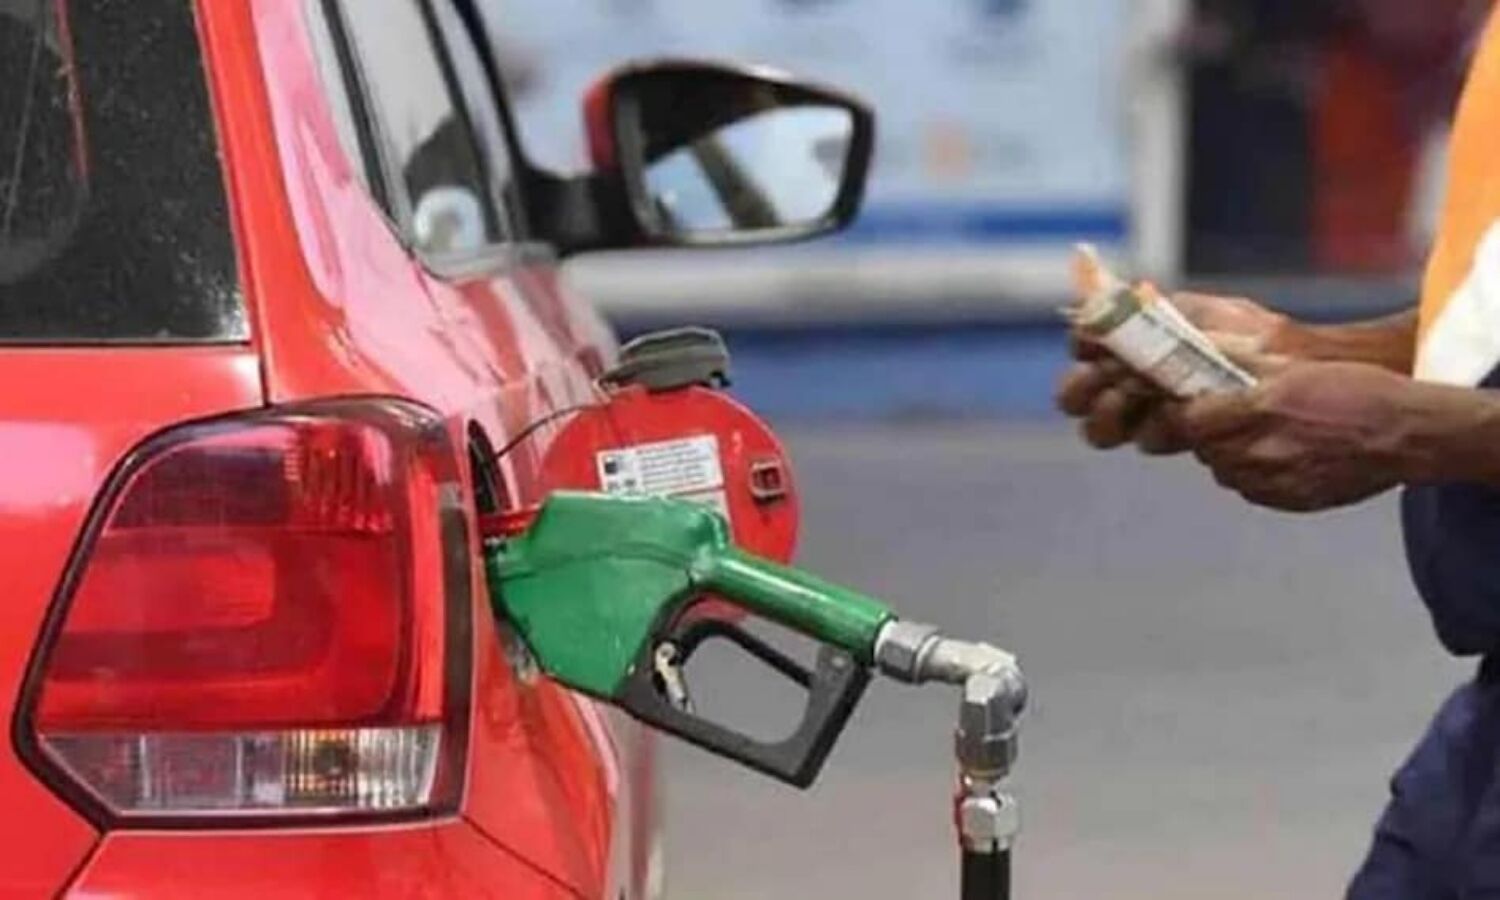 Petrol-Diesel Price Today: Oil companies released new rates of petrol-diesel, know what was the effect on prices